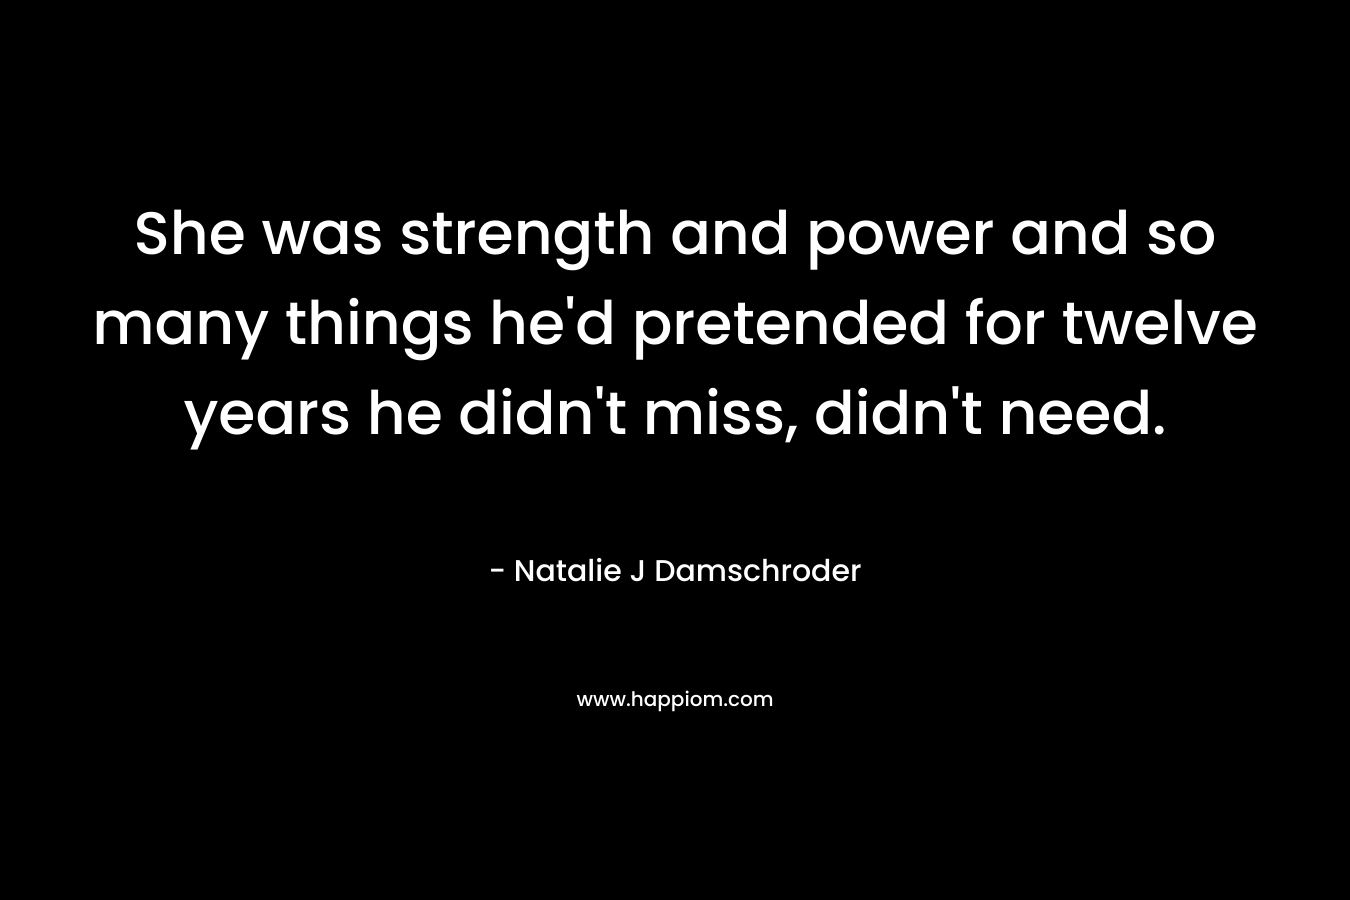 She was strength and power and so many things he’d pretended for twelve years he didn’t miss, didn’t need. – Natalie J Damschroder